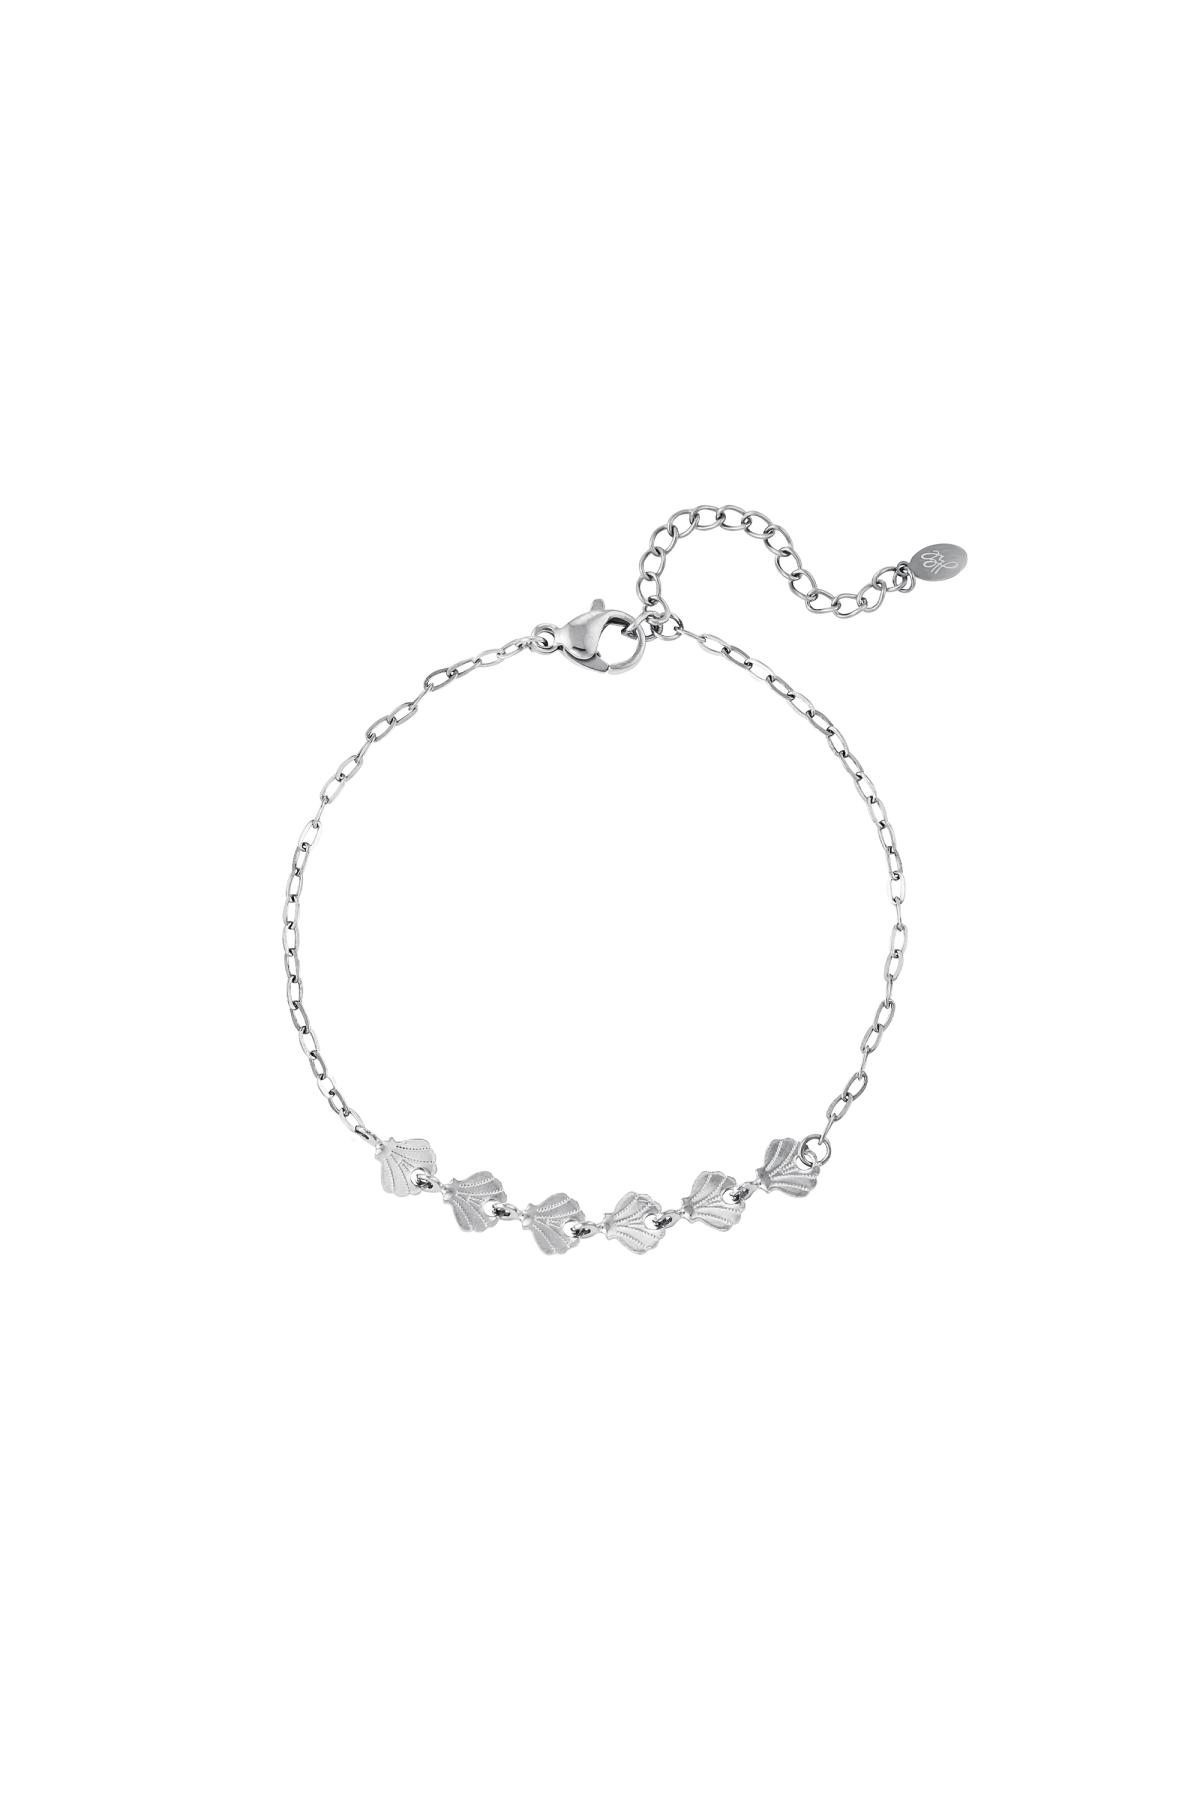 Sea shell bracelet - Beach collection Silver Stainless Steel